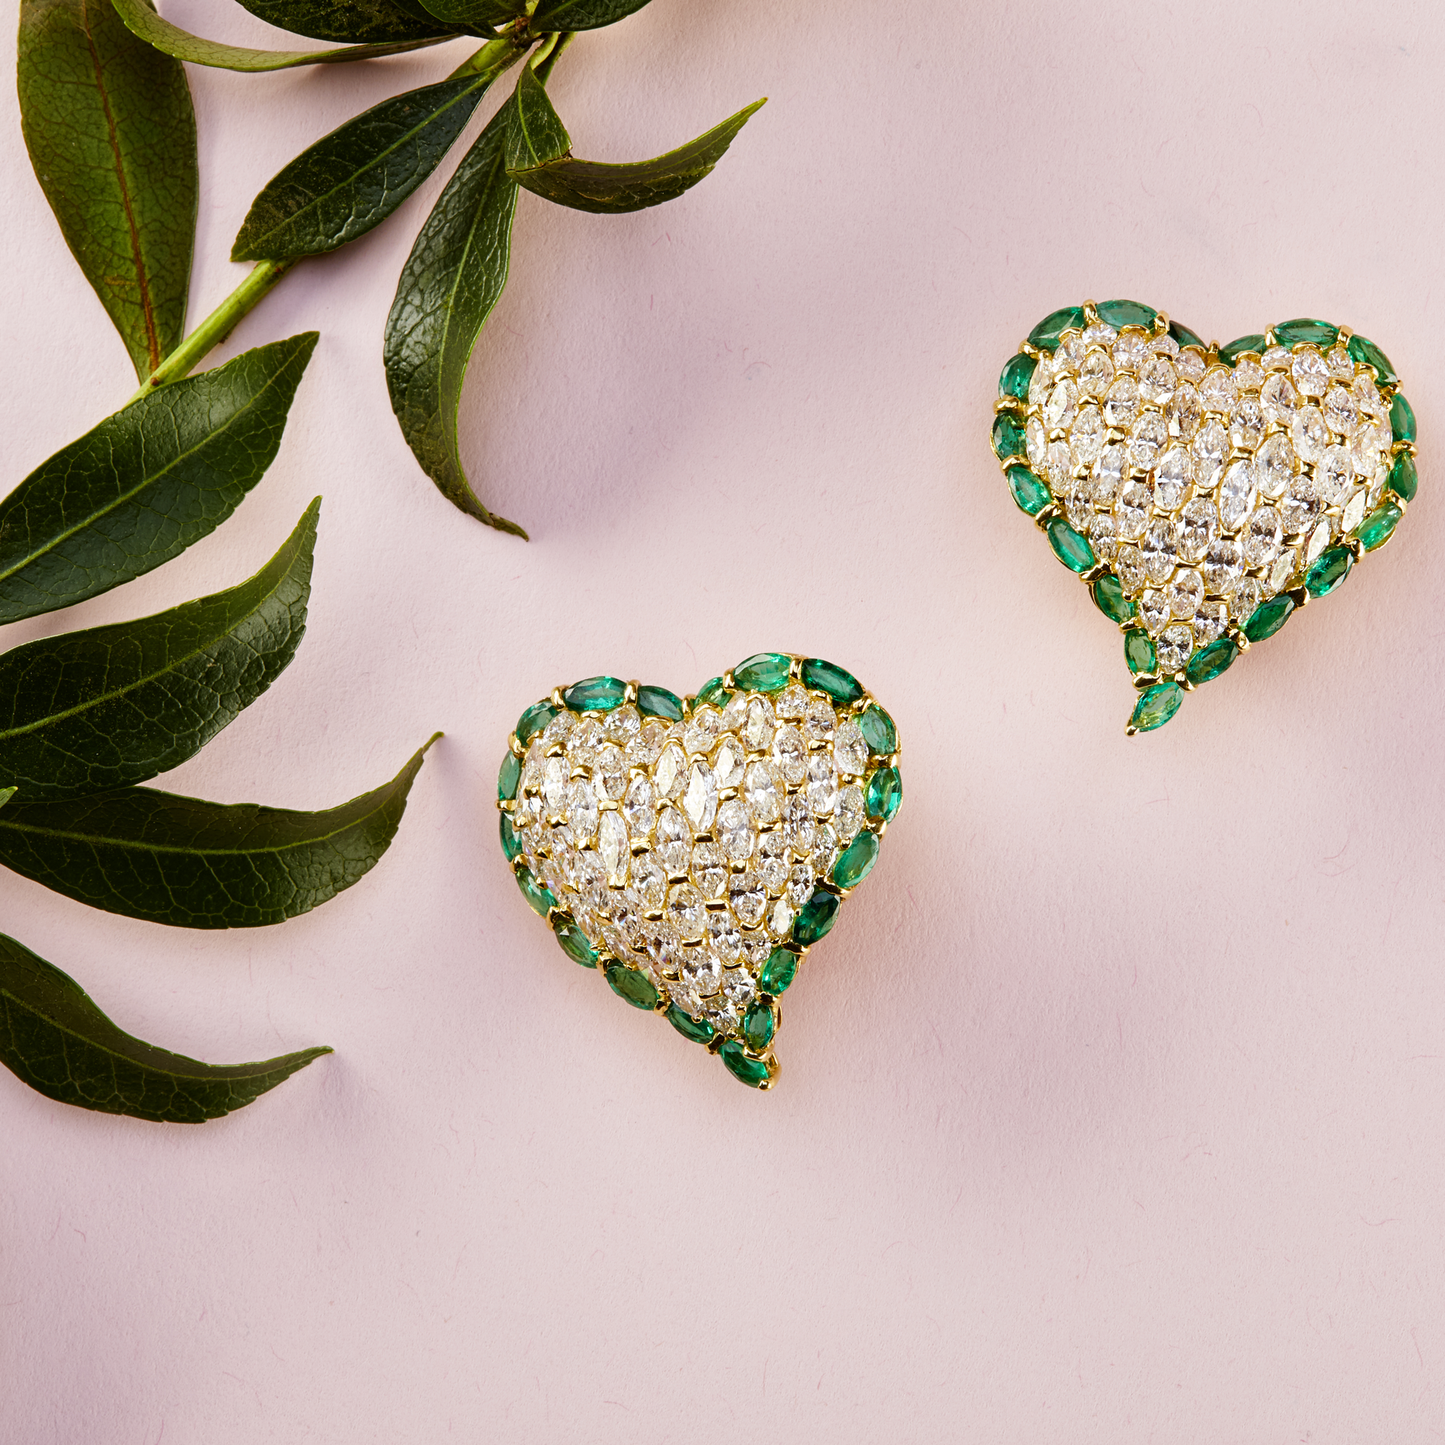 Moussaieff 1980s 18KT Yellow Gold Diamond & Emerald Heart Earrings front view